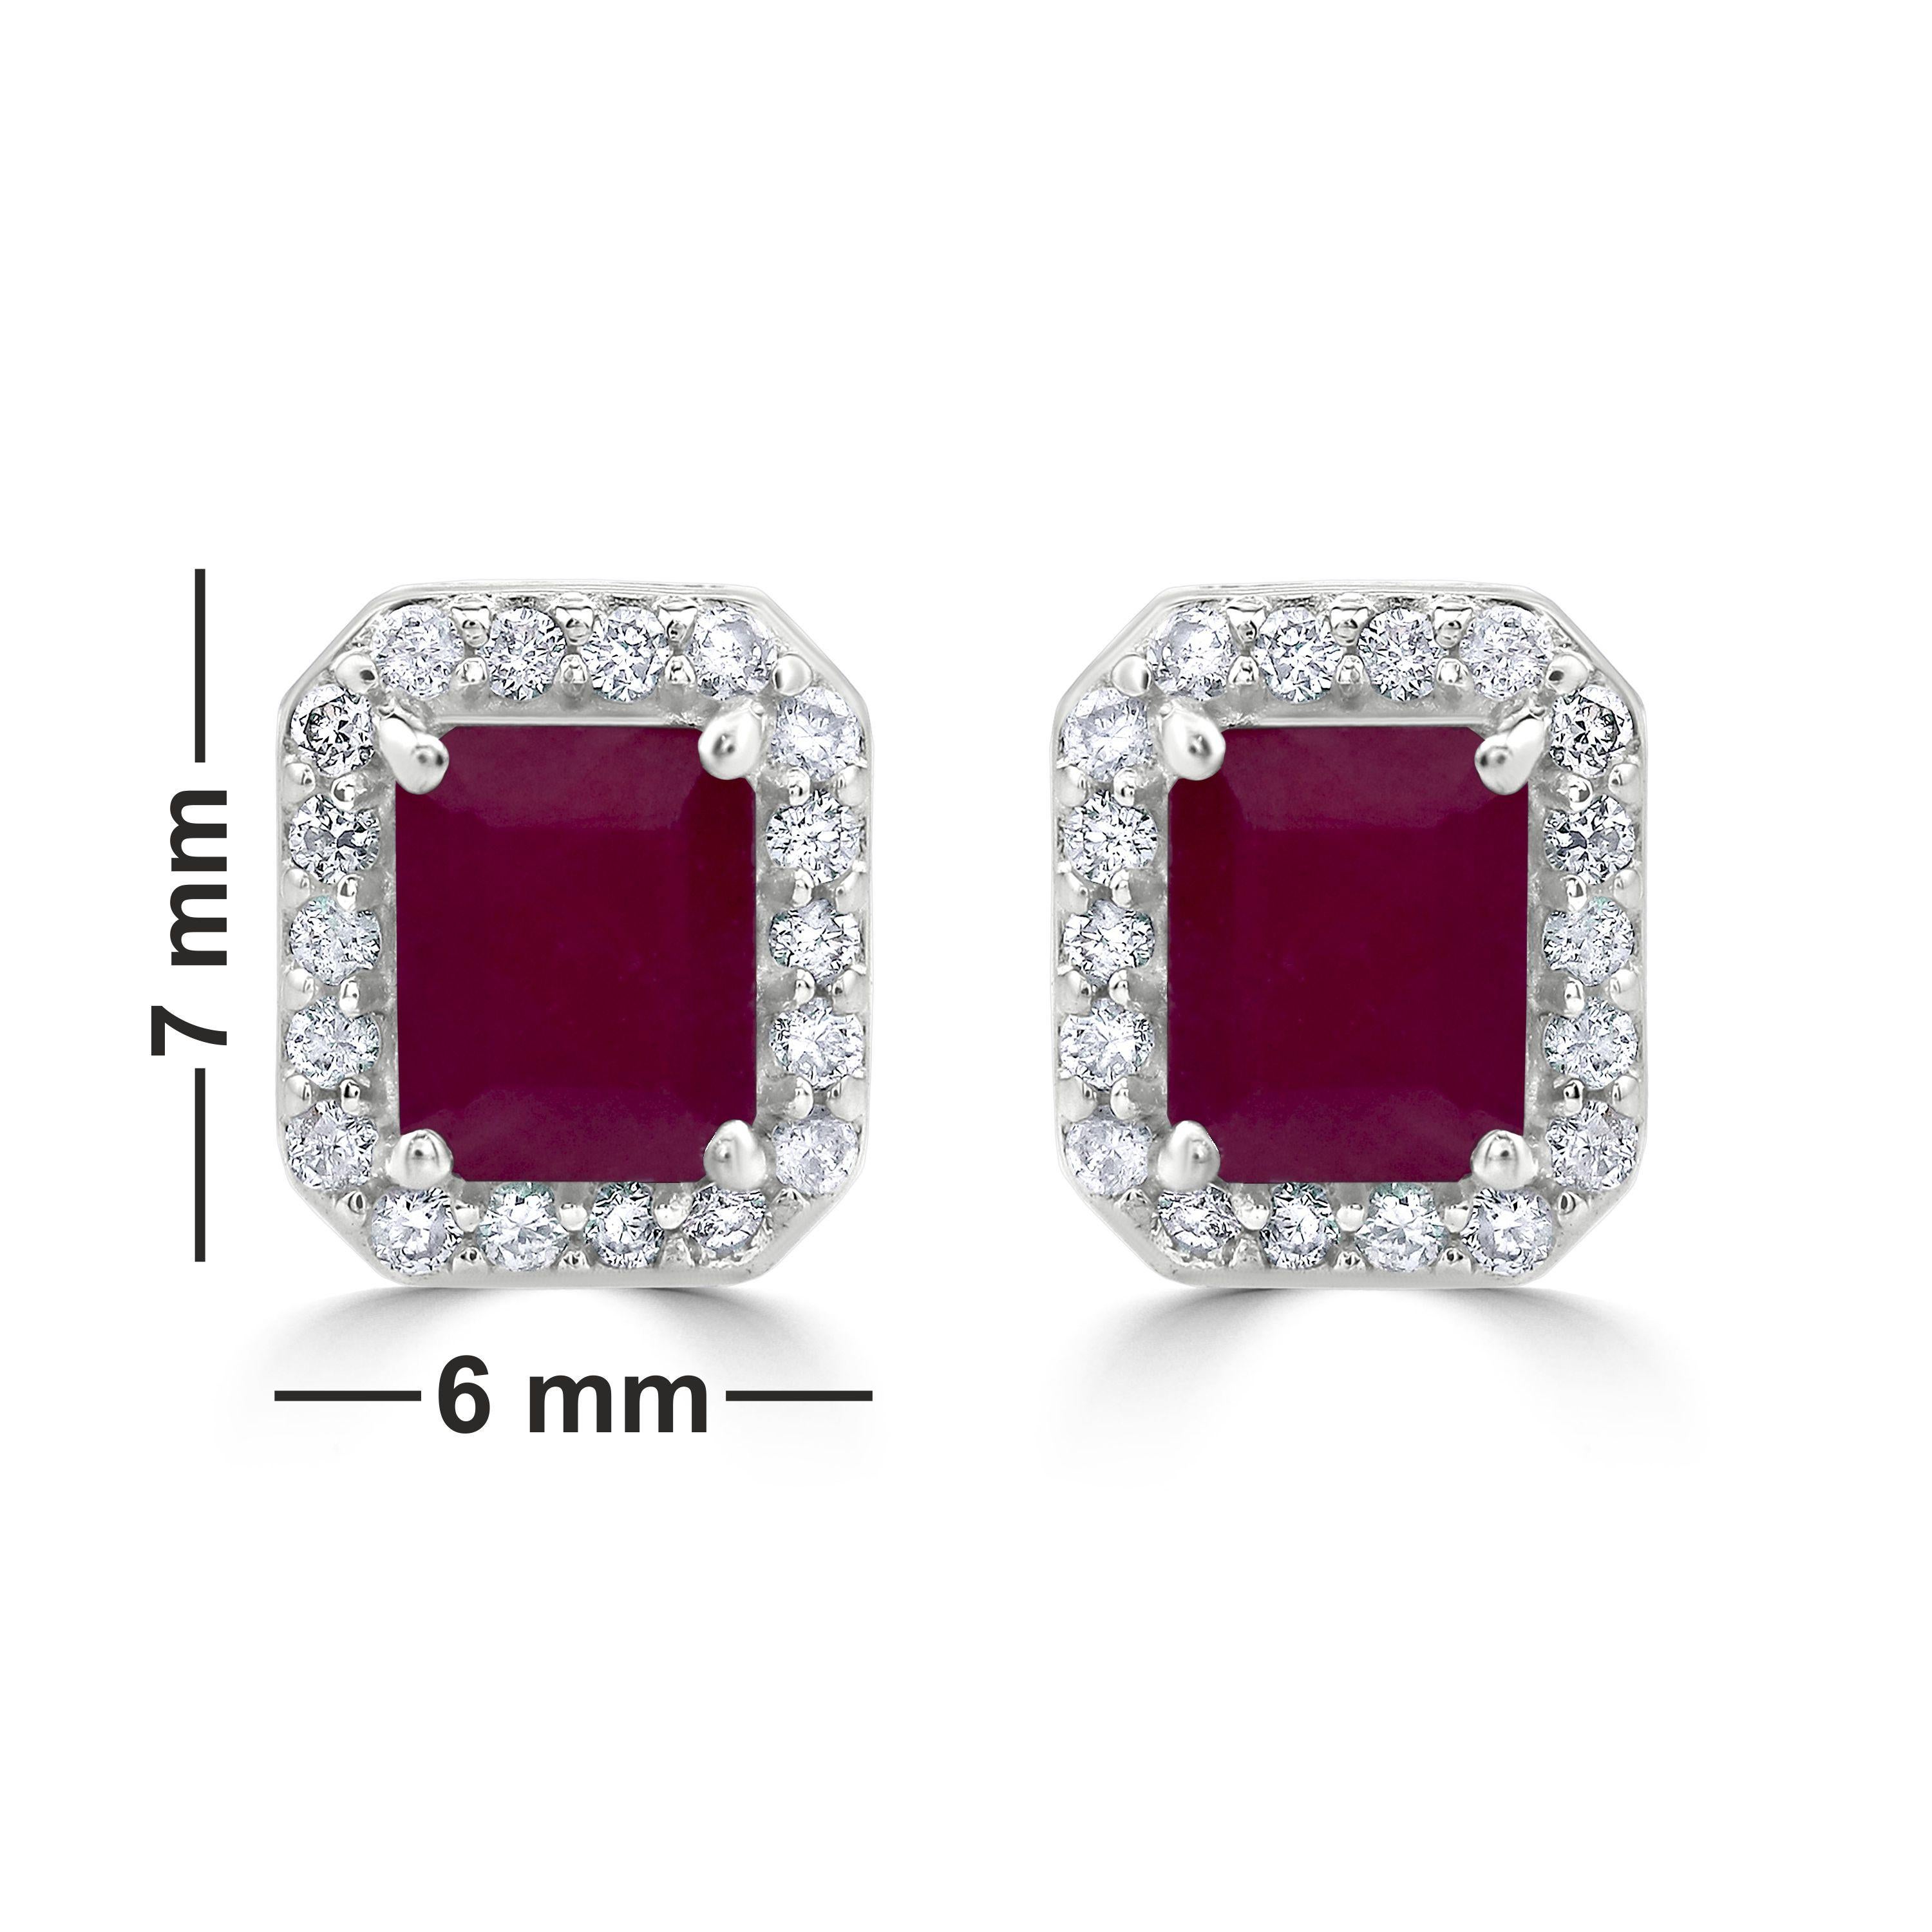 Gemistry 1.45 Carats Octagon Ruby Stud Earrings with Diamond in 14K White Gold In New Condition For Sale In New York, NY